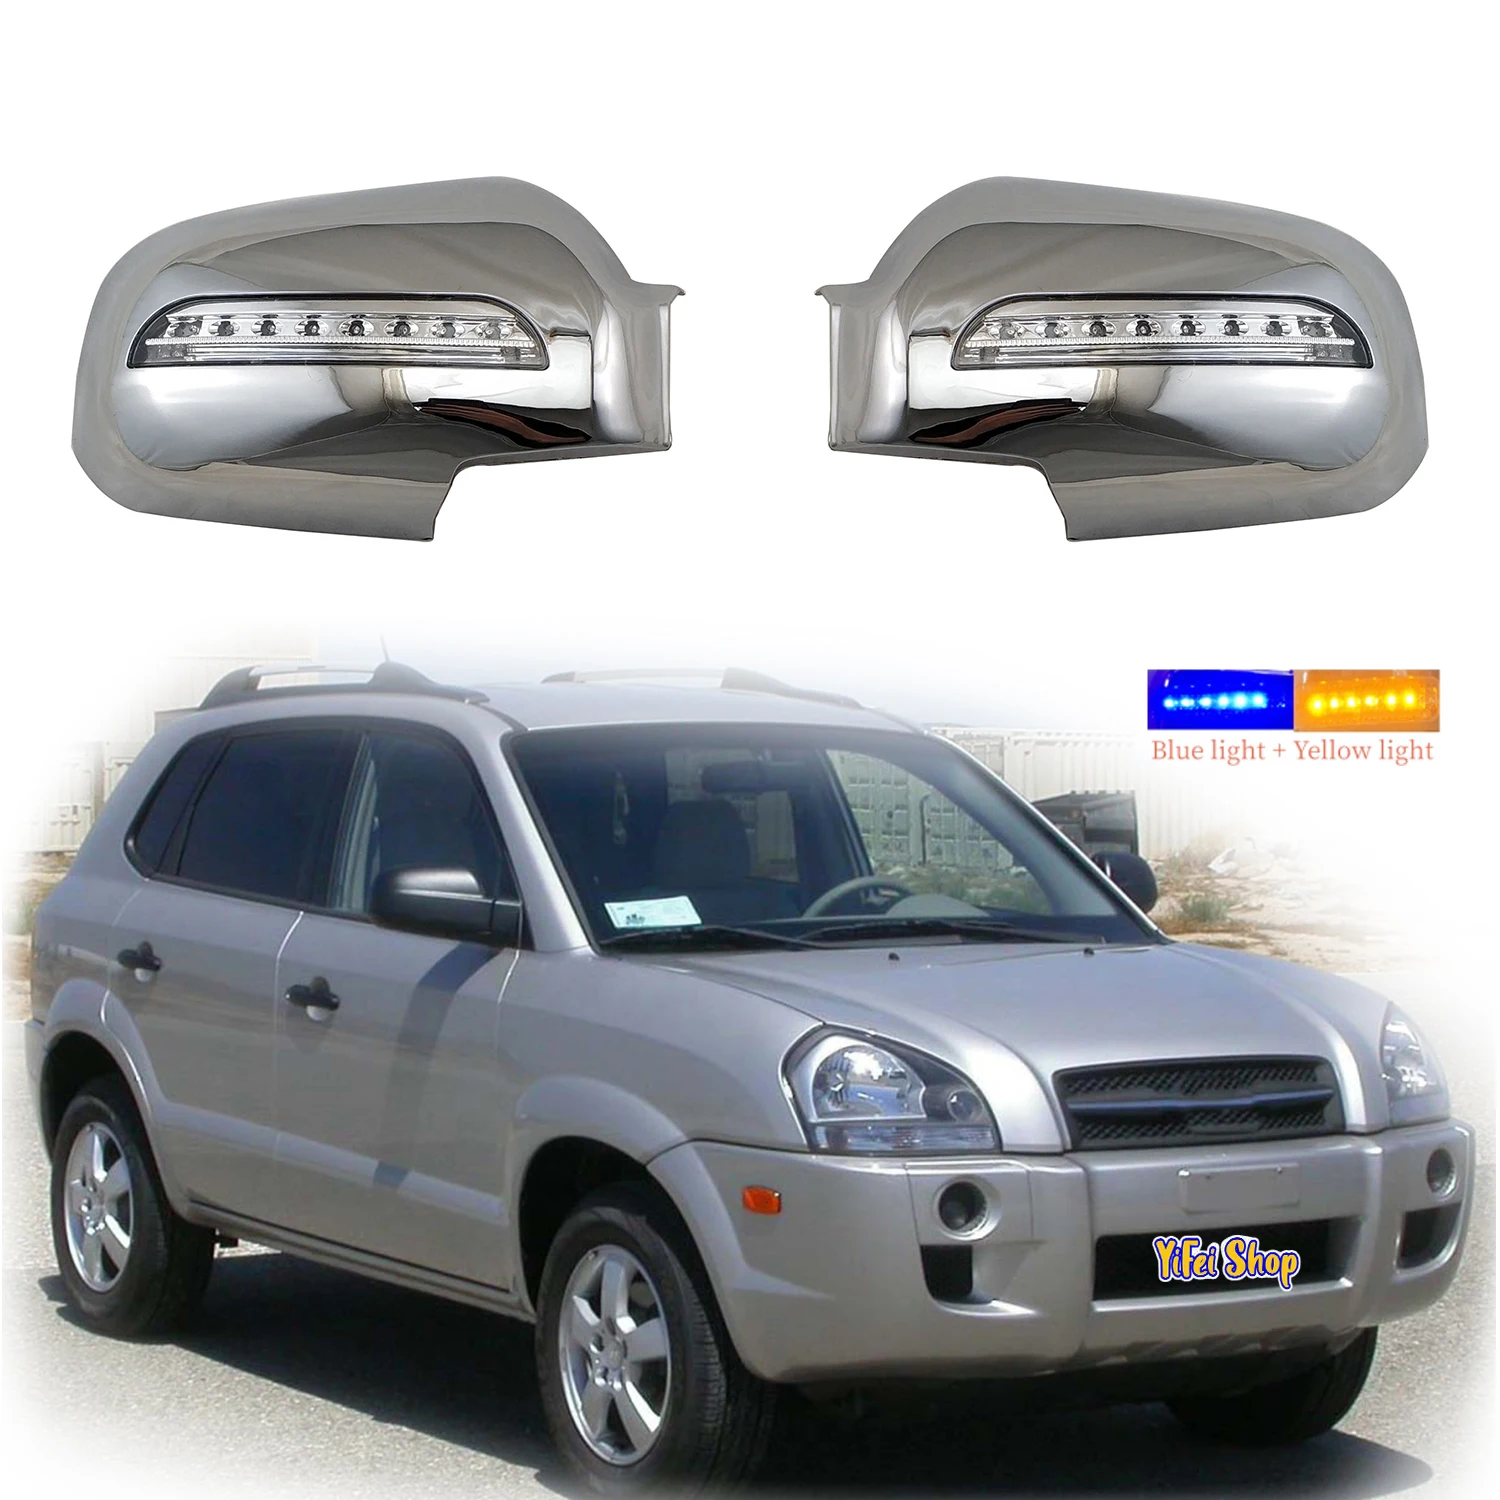 

2pcs Car ABS Chrome Rearview Accessories Plated Trim 2005 2006 2008 2009 2010 2012 For Hyundai Tucson Door Mirror Cover With LED